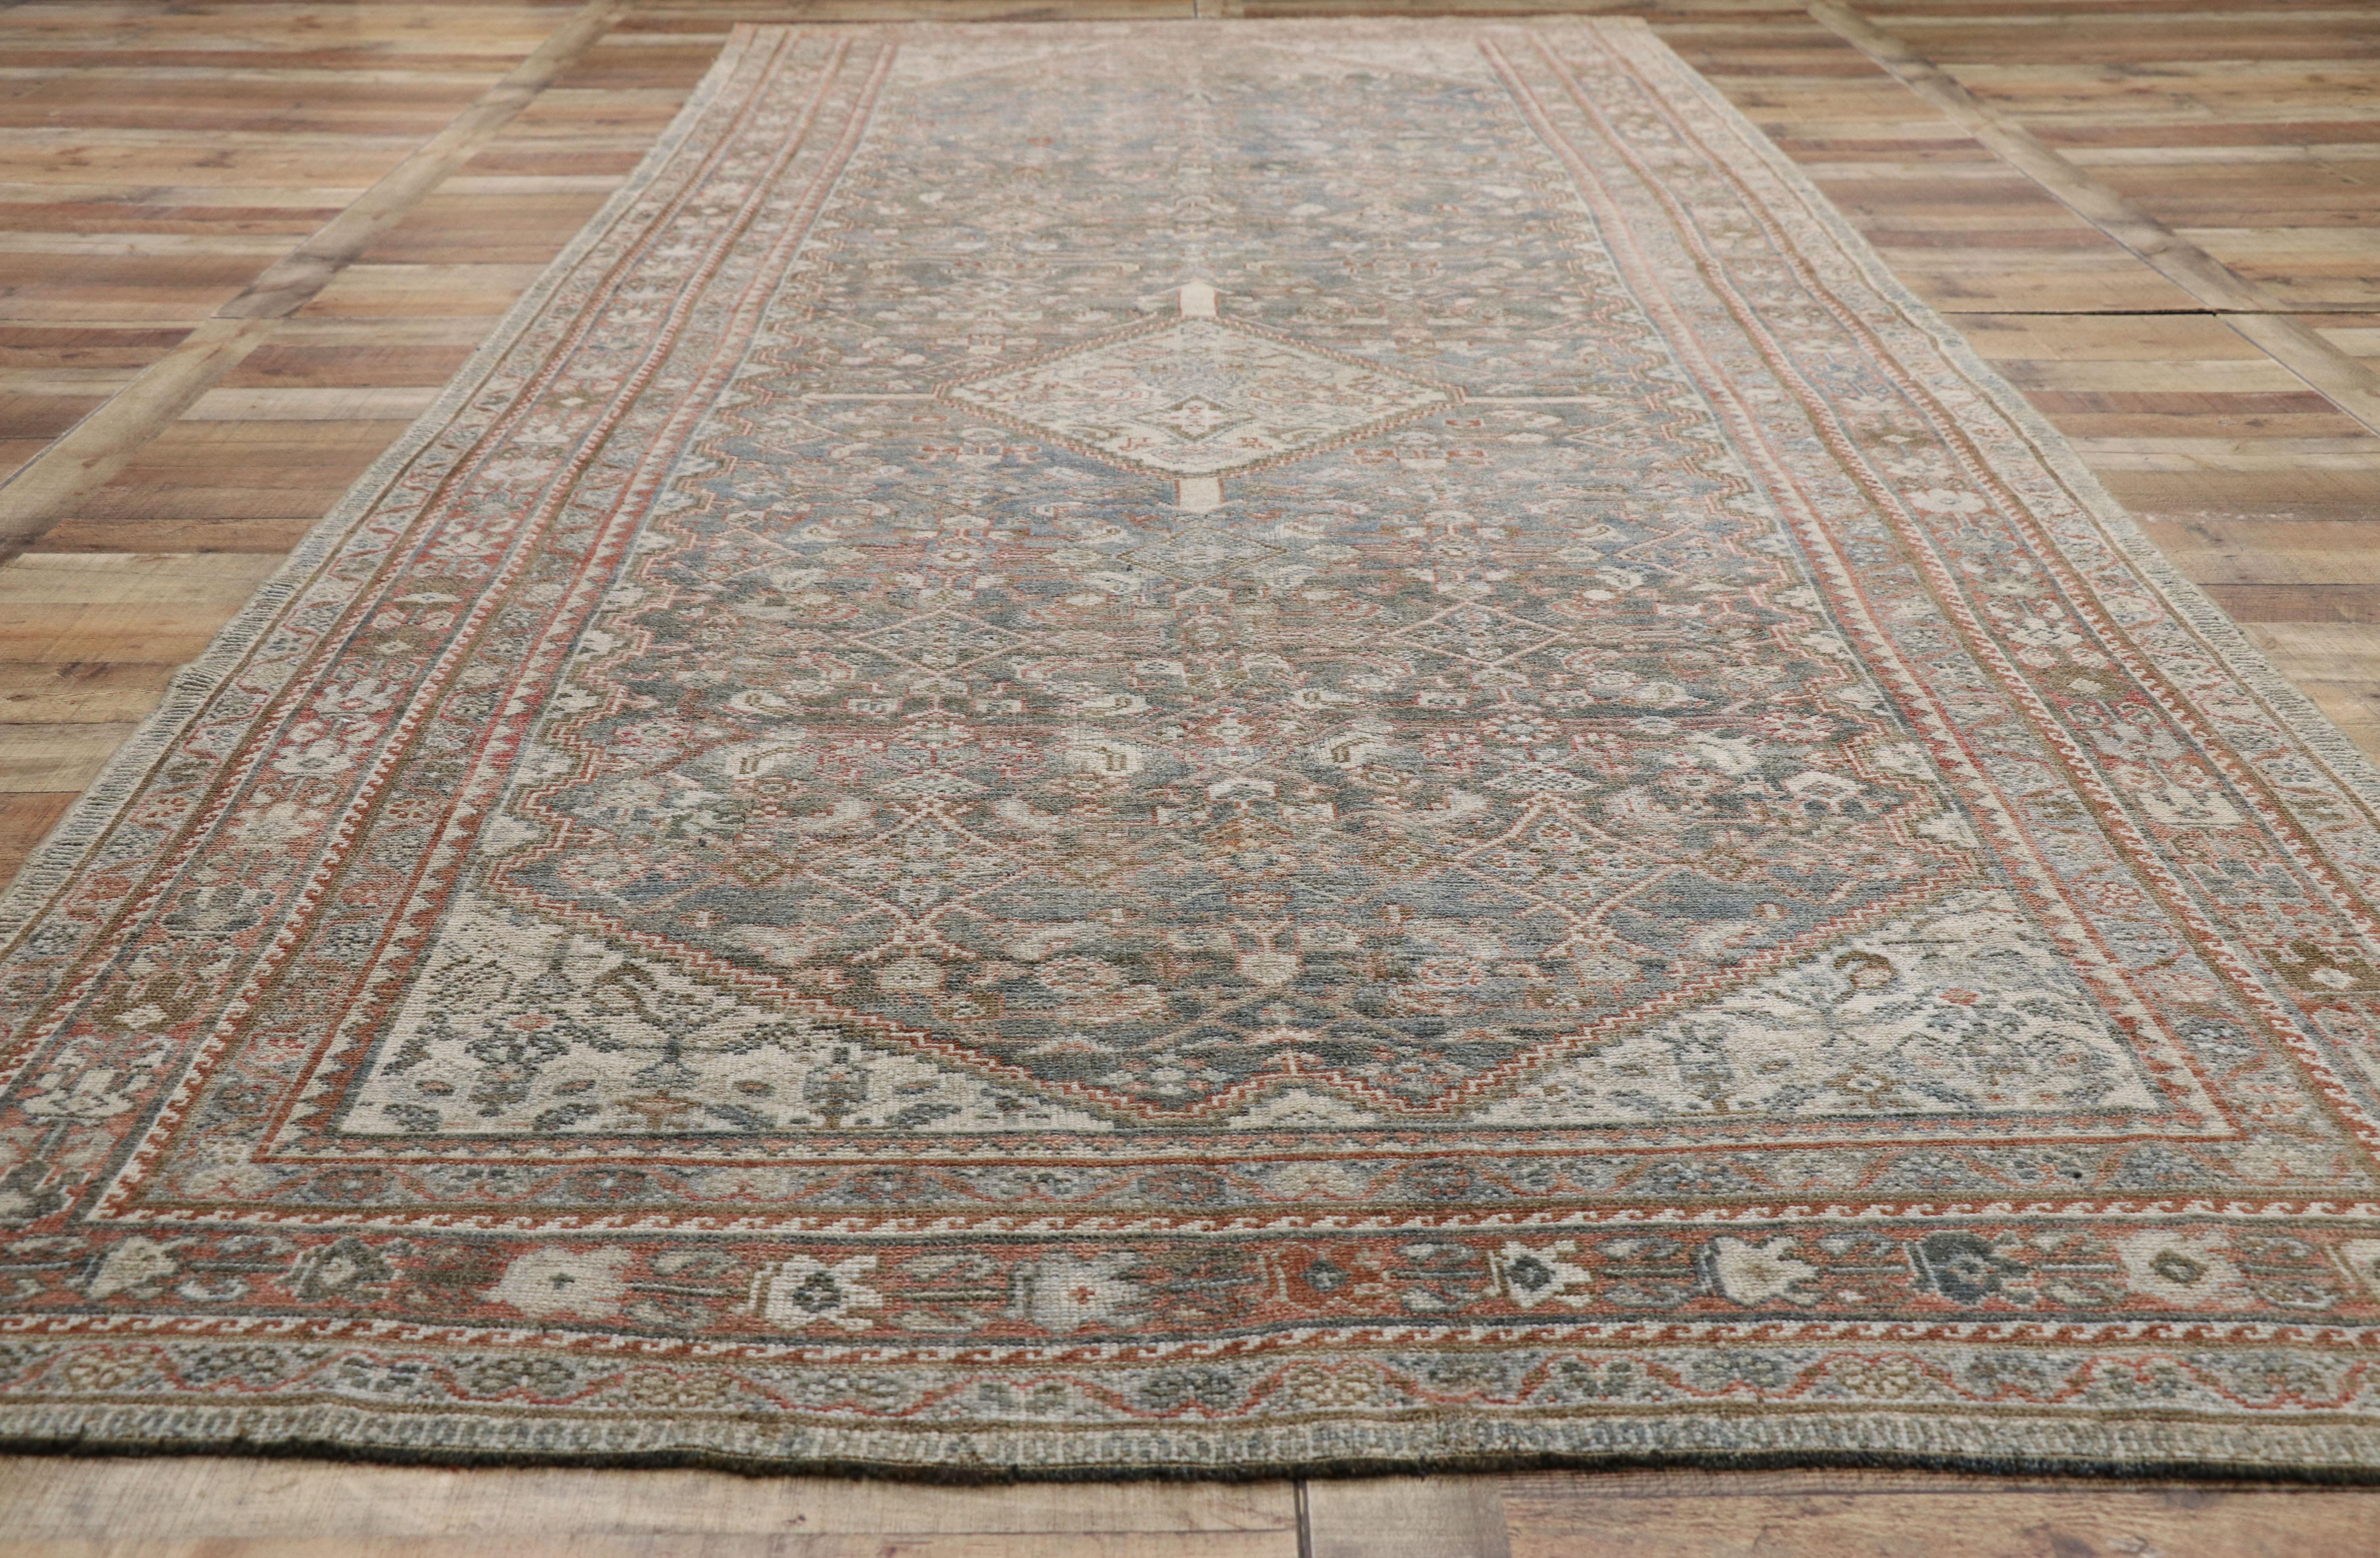 20th Century Distressed Antique Persian Malayer Style Gallery Rug with Rustic Craftsman Style